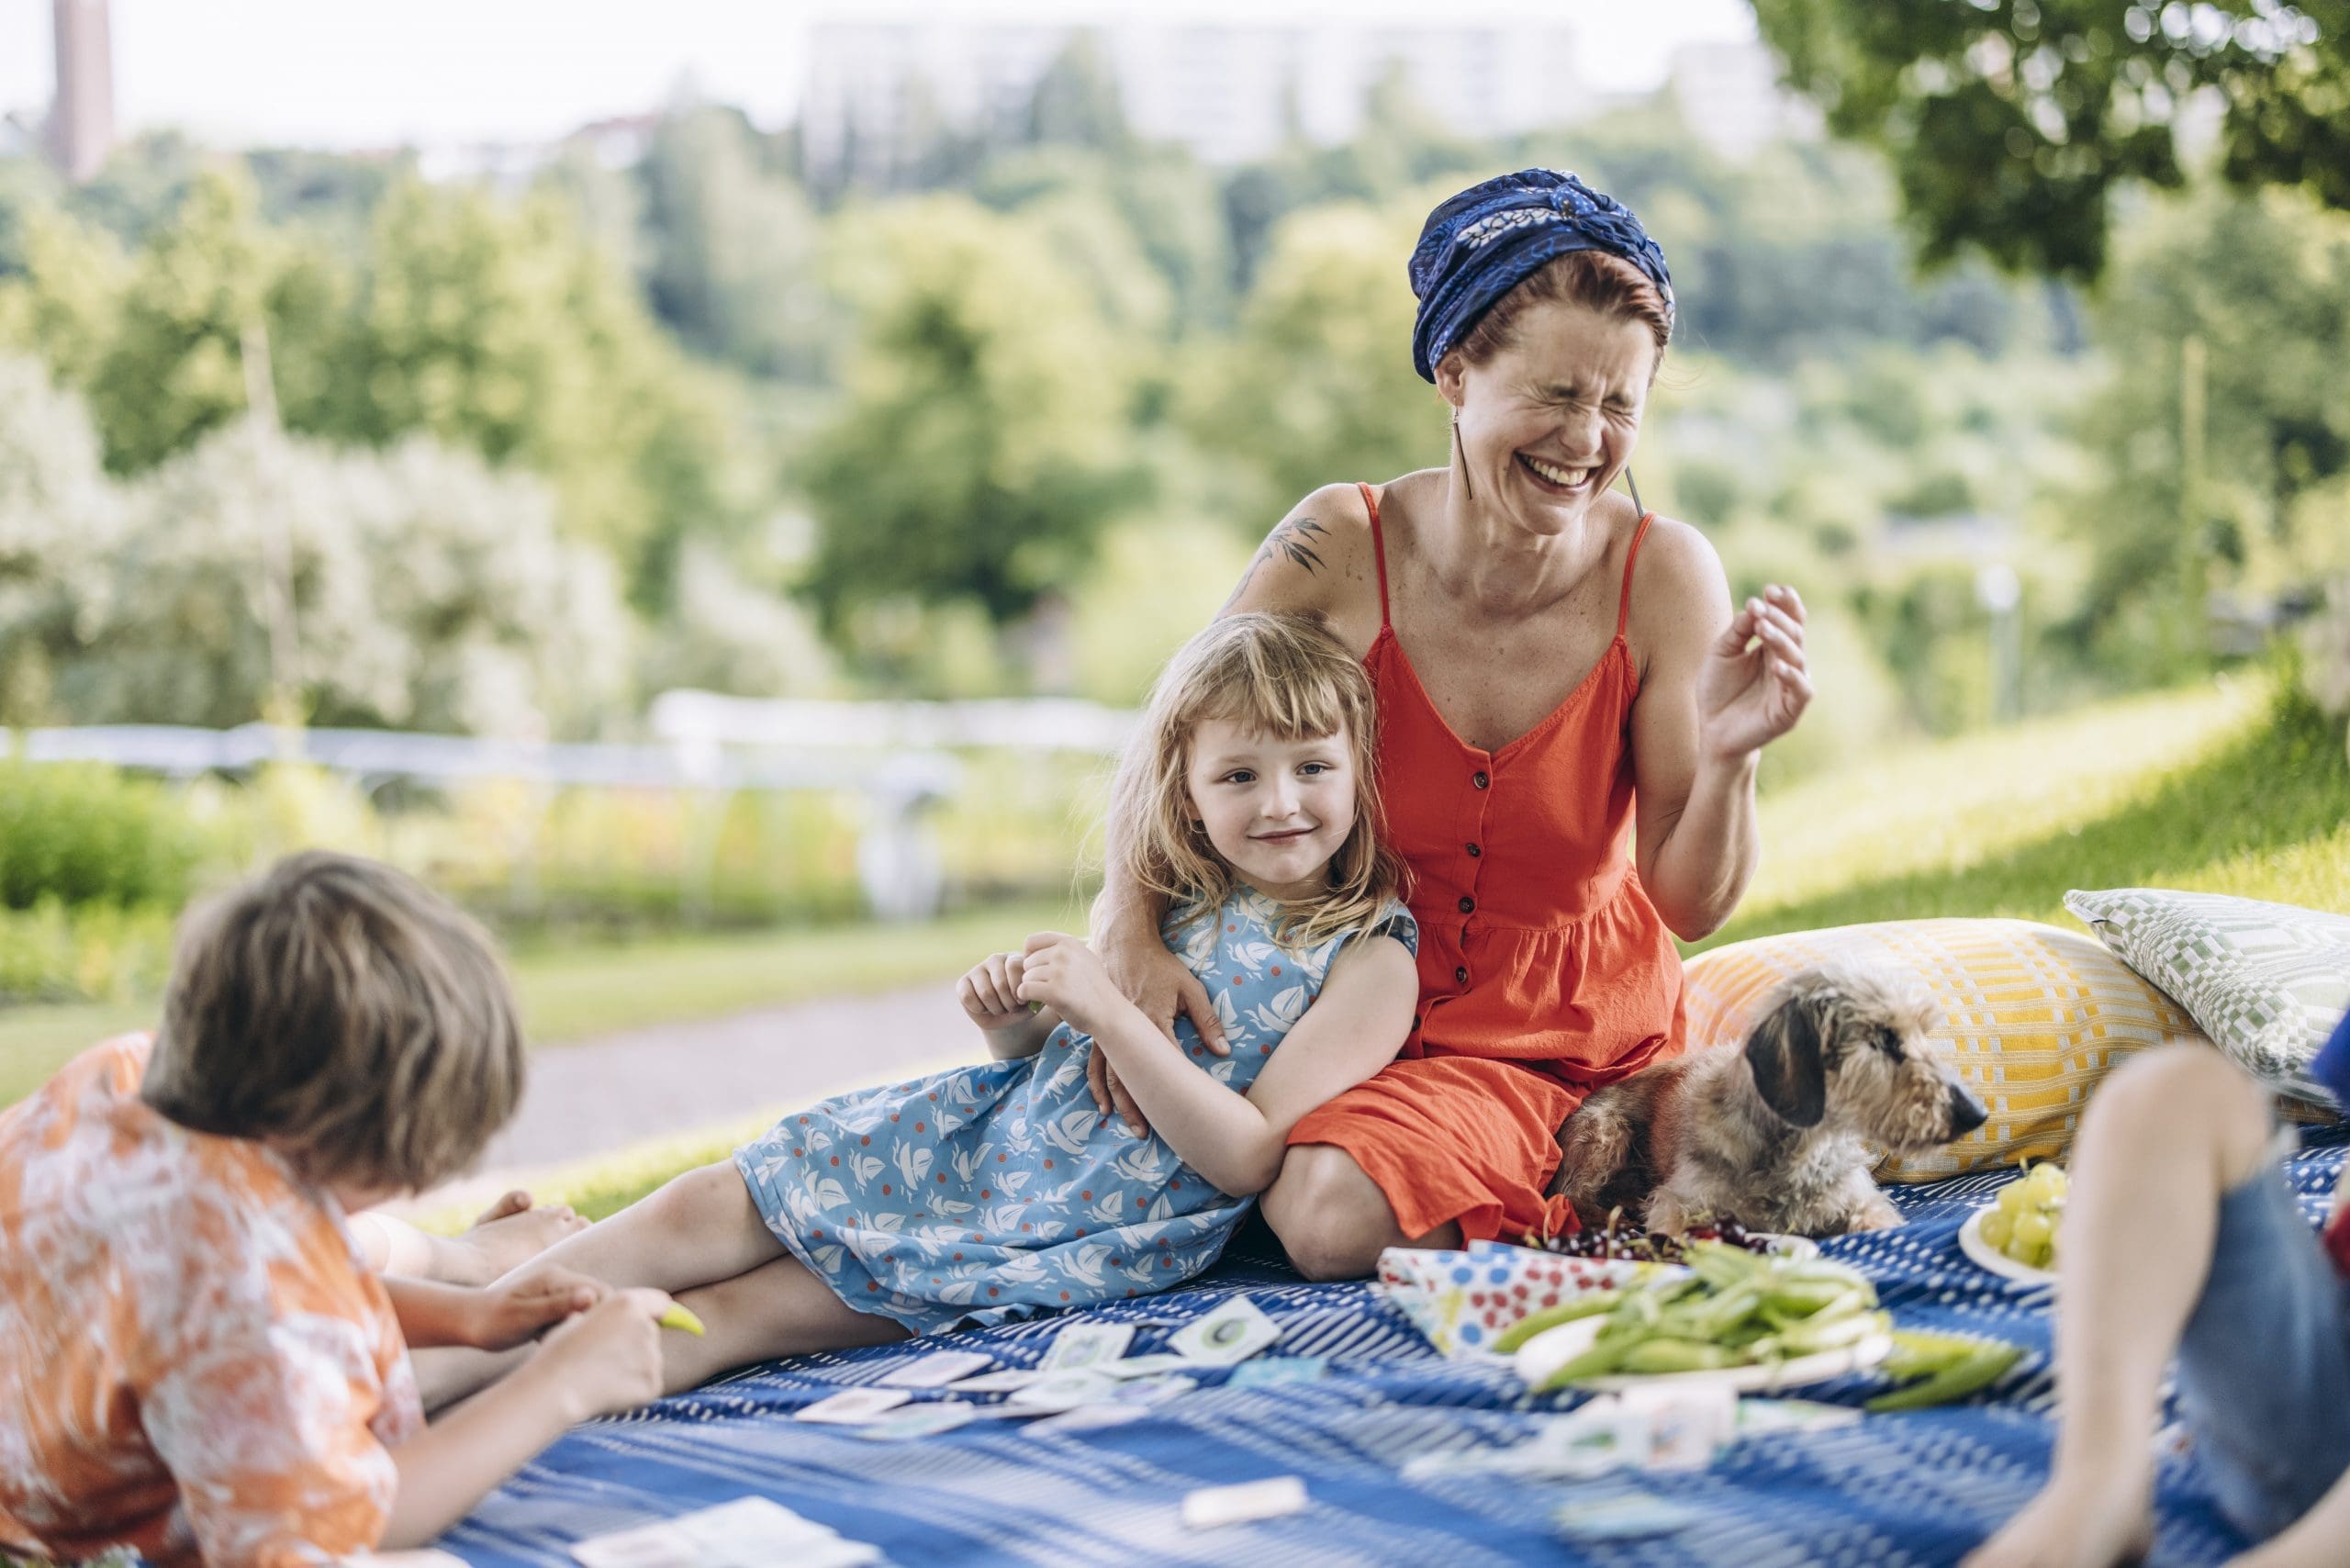 Sitting on a picnic blanket with the rolling greenery of the park in the background, a mother laughs with their eyes closed while holding a girl who's lying in her lap. Two other kids and a small dog are also laying on the blanket.